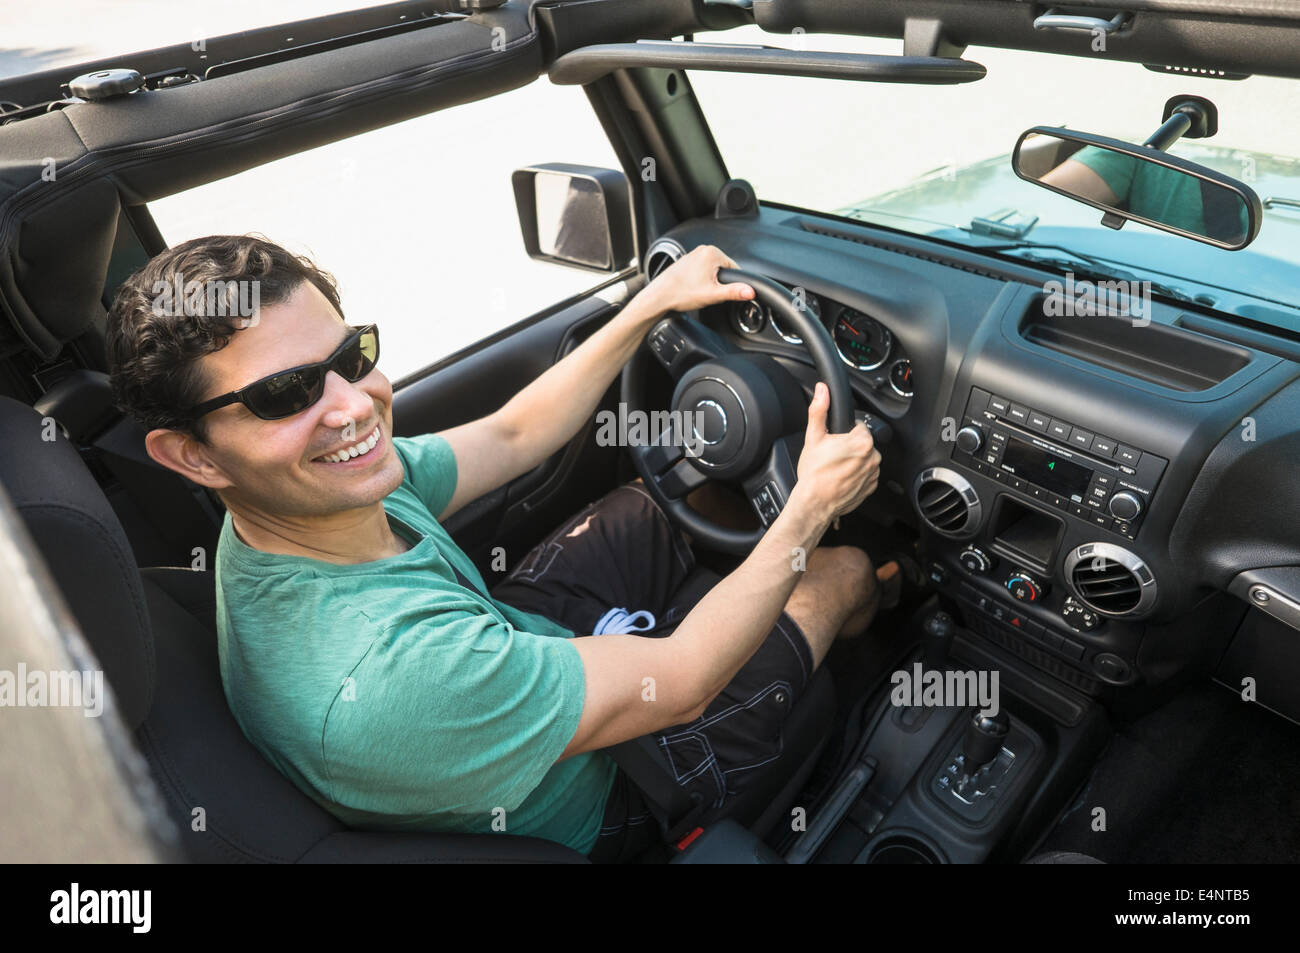 Elevated view of man driving car Stock Photo